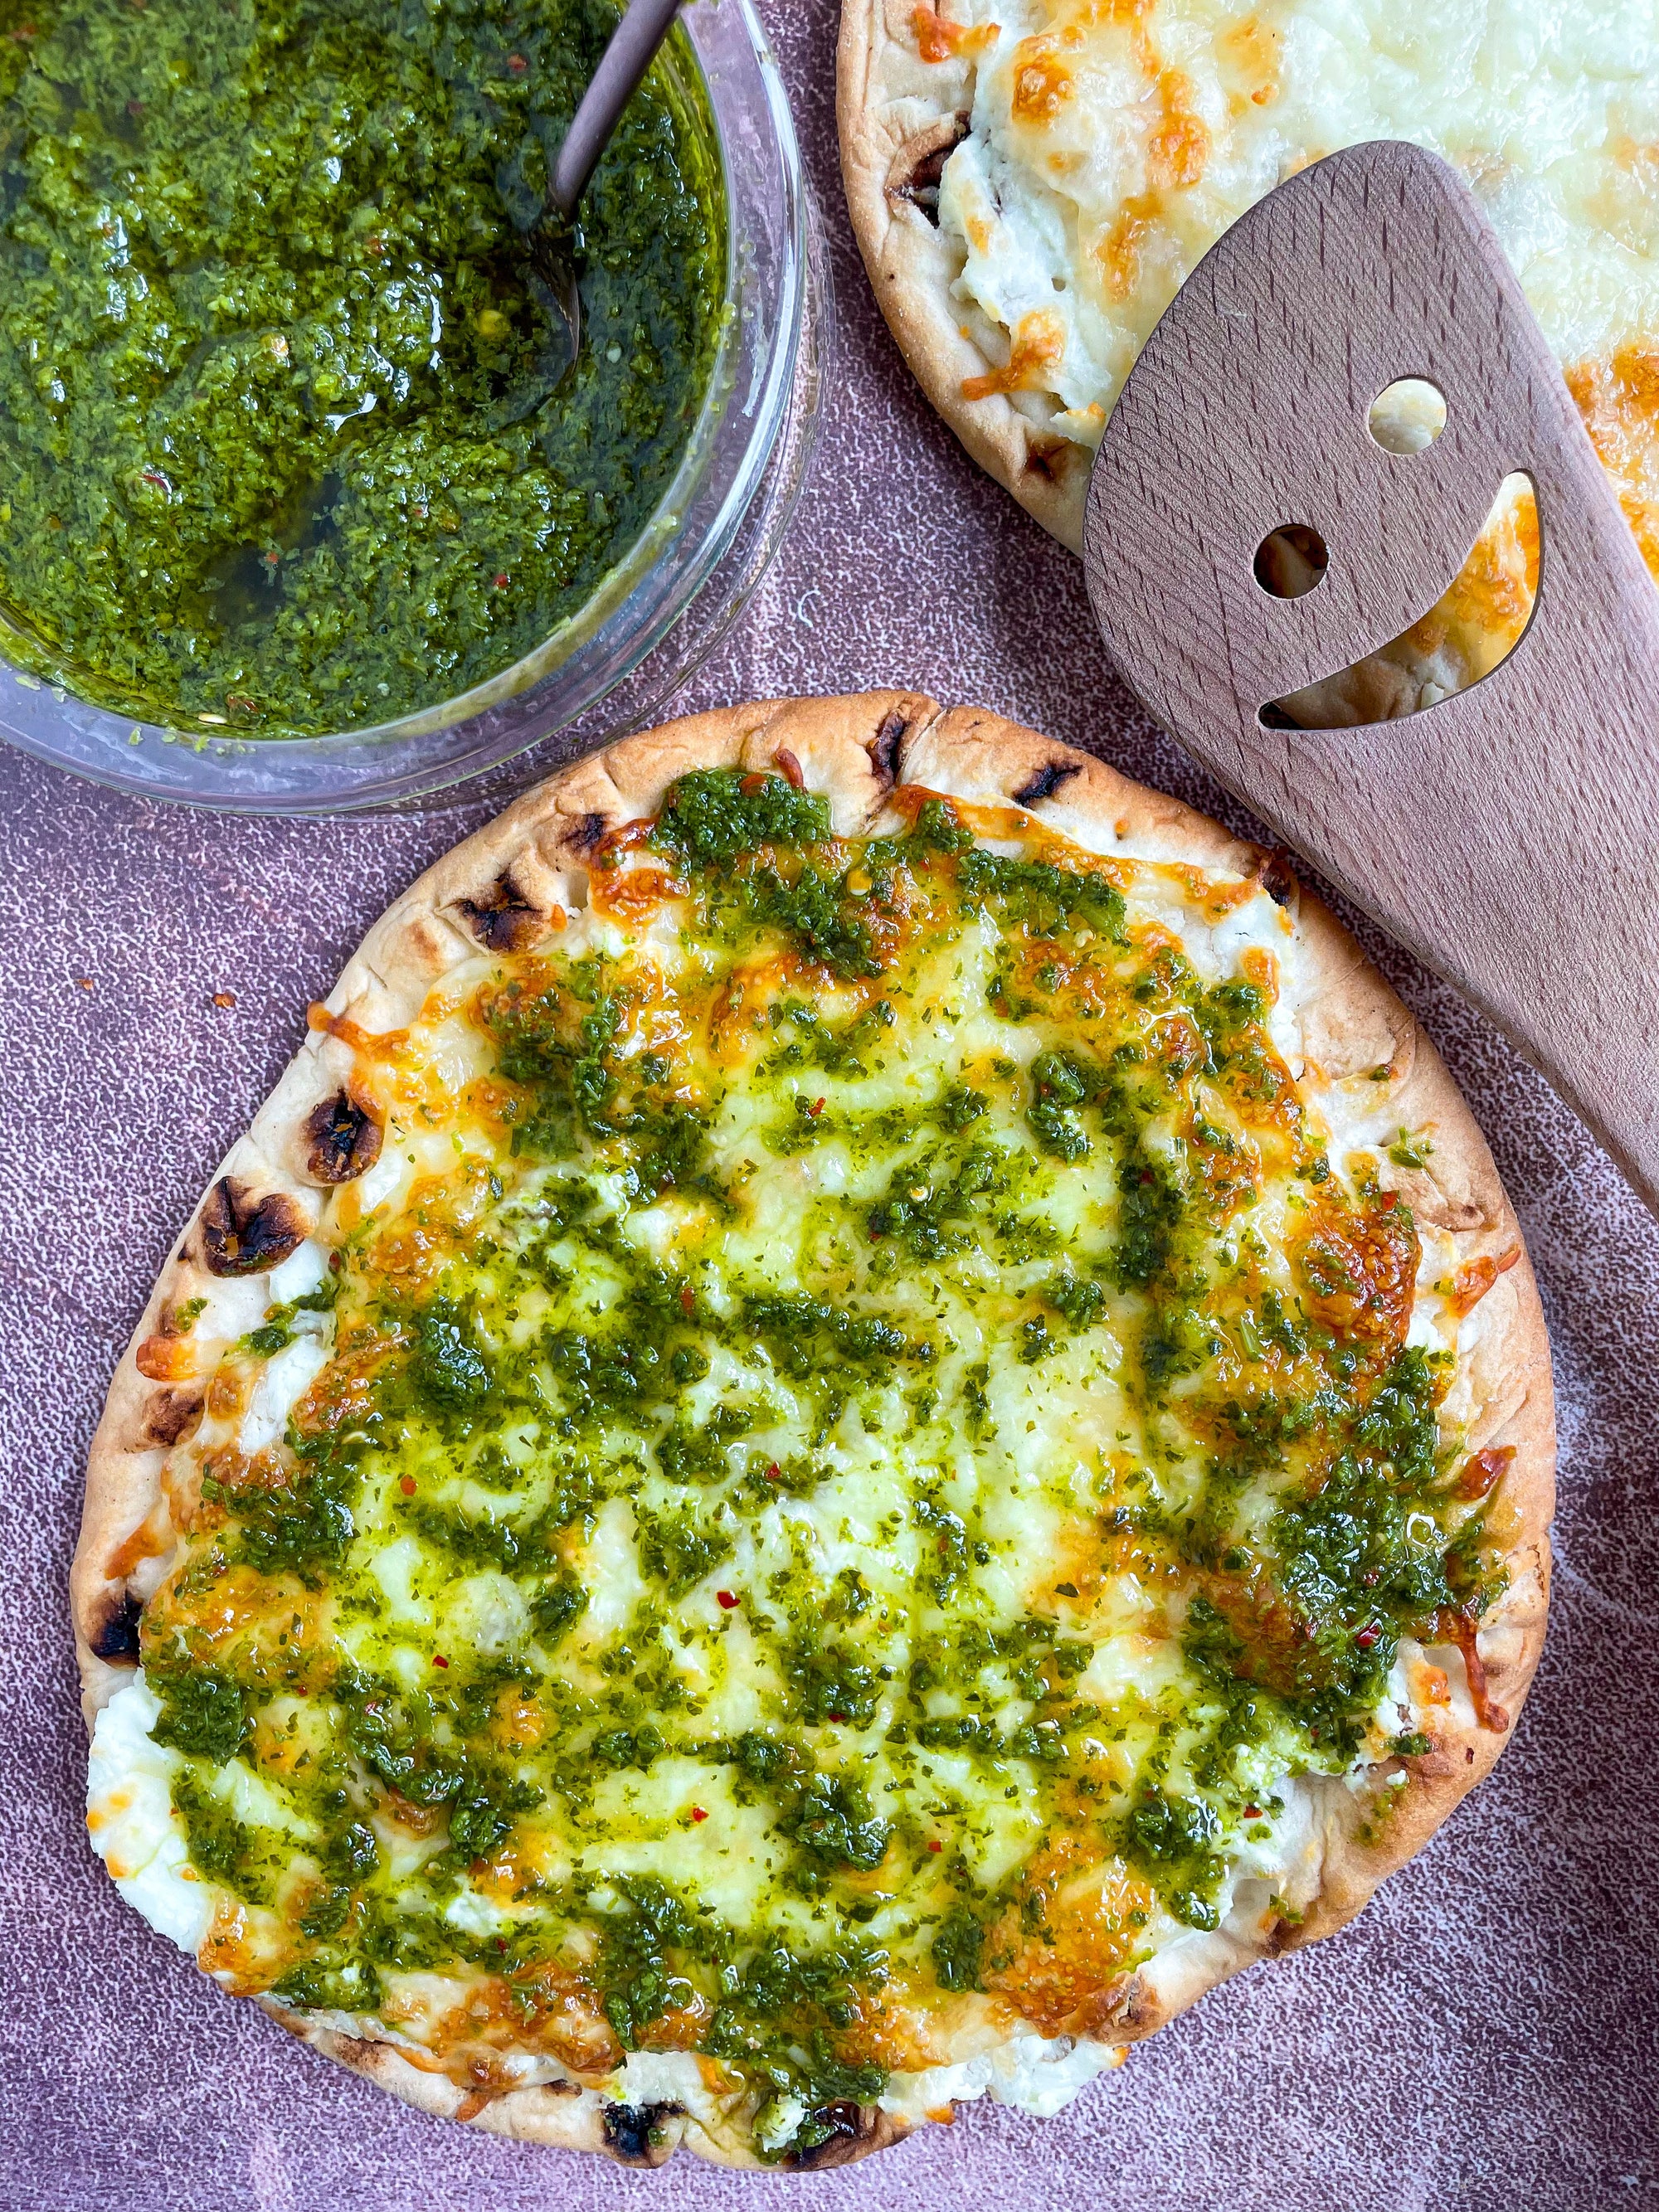 Goat Cheese Pizza with Chimichurri Sauce